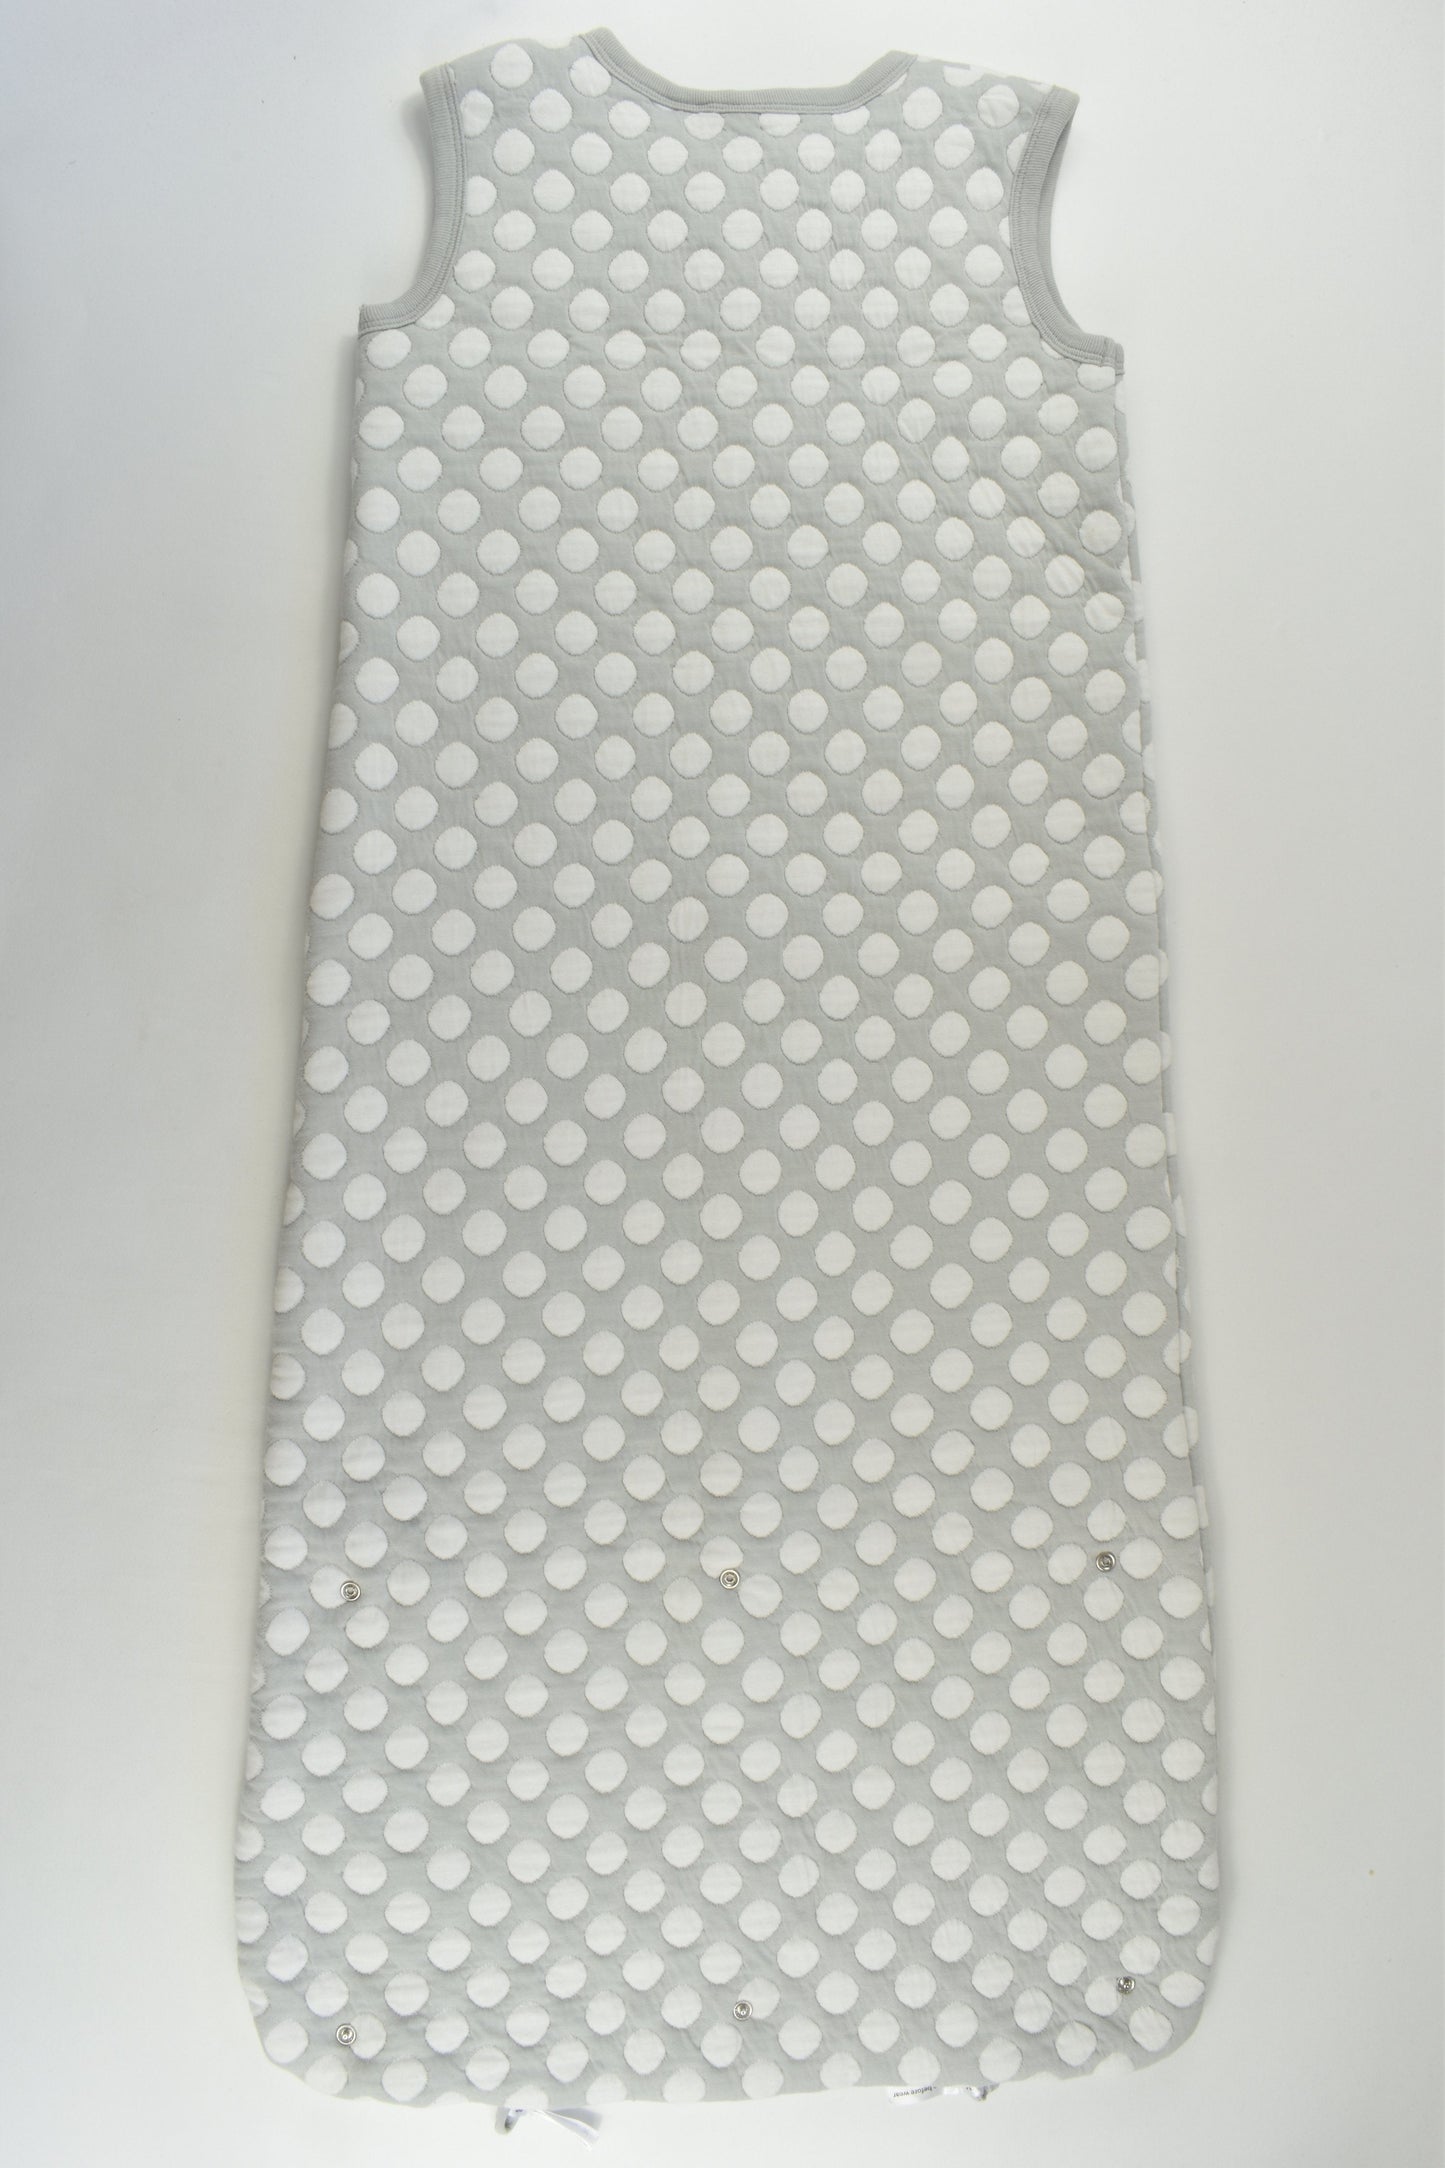 NEW Cotton On Baby Size 1-3 (18-36 months) Approx 1.5 Tog Polka Dots Sleeping Bag